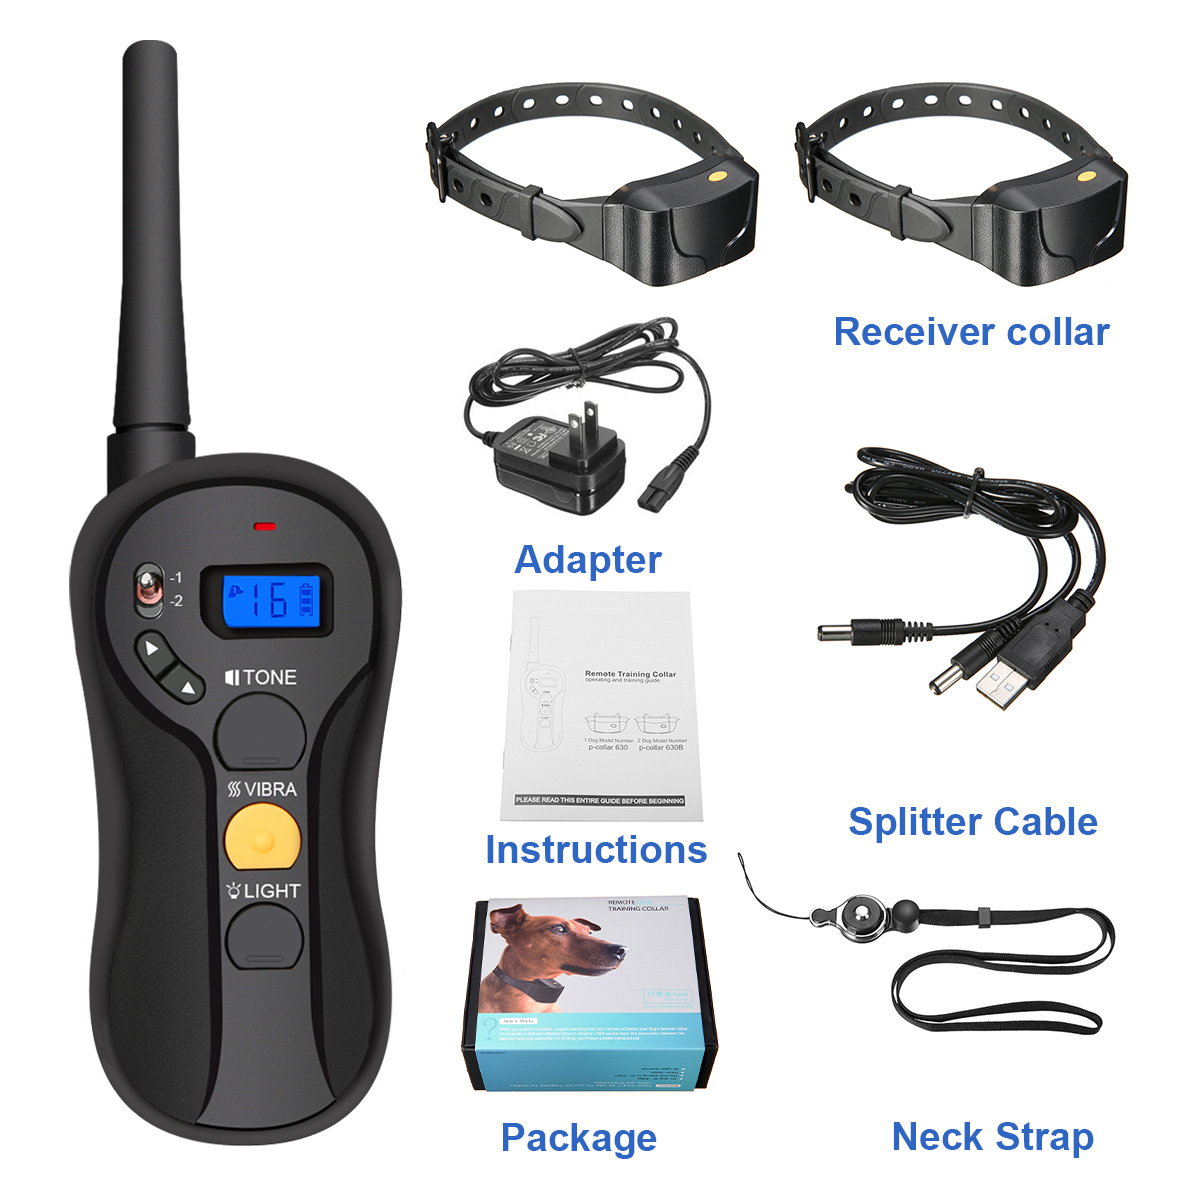 2x-Focuspet-LCD-Electric-Remote-Dog-Shock-Bark-Collar-Trainer-Training-IPX7-1305108-2